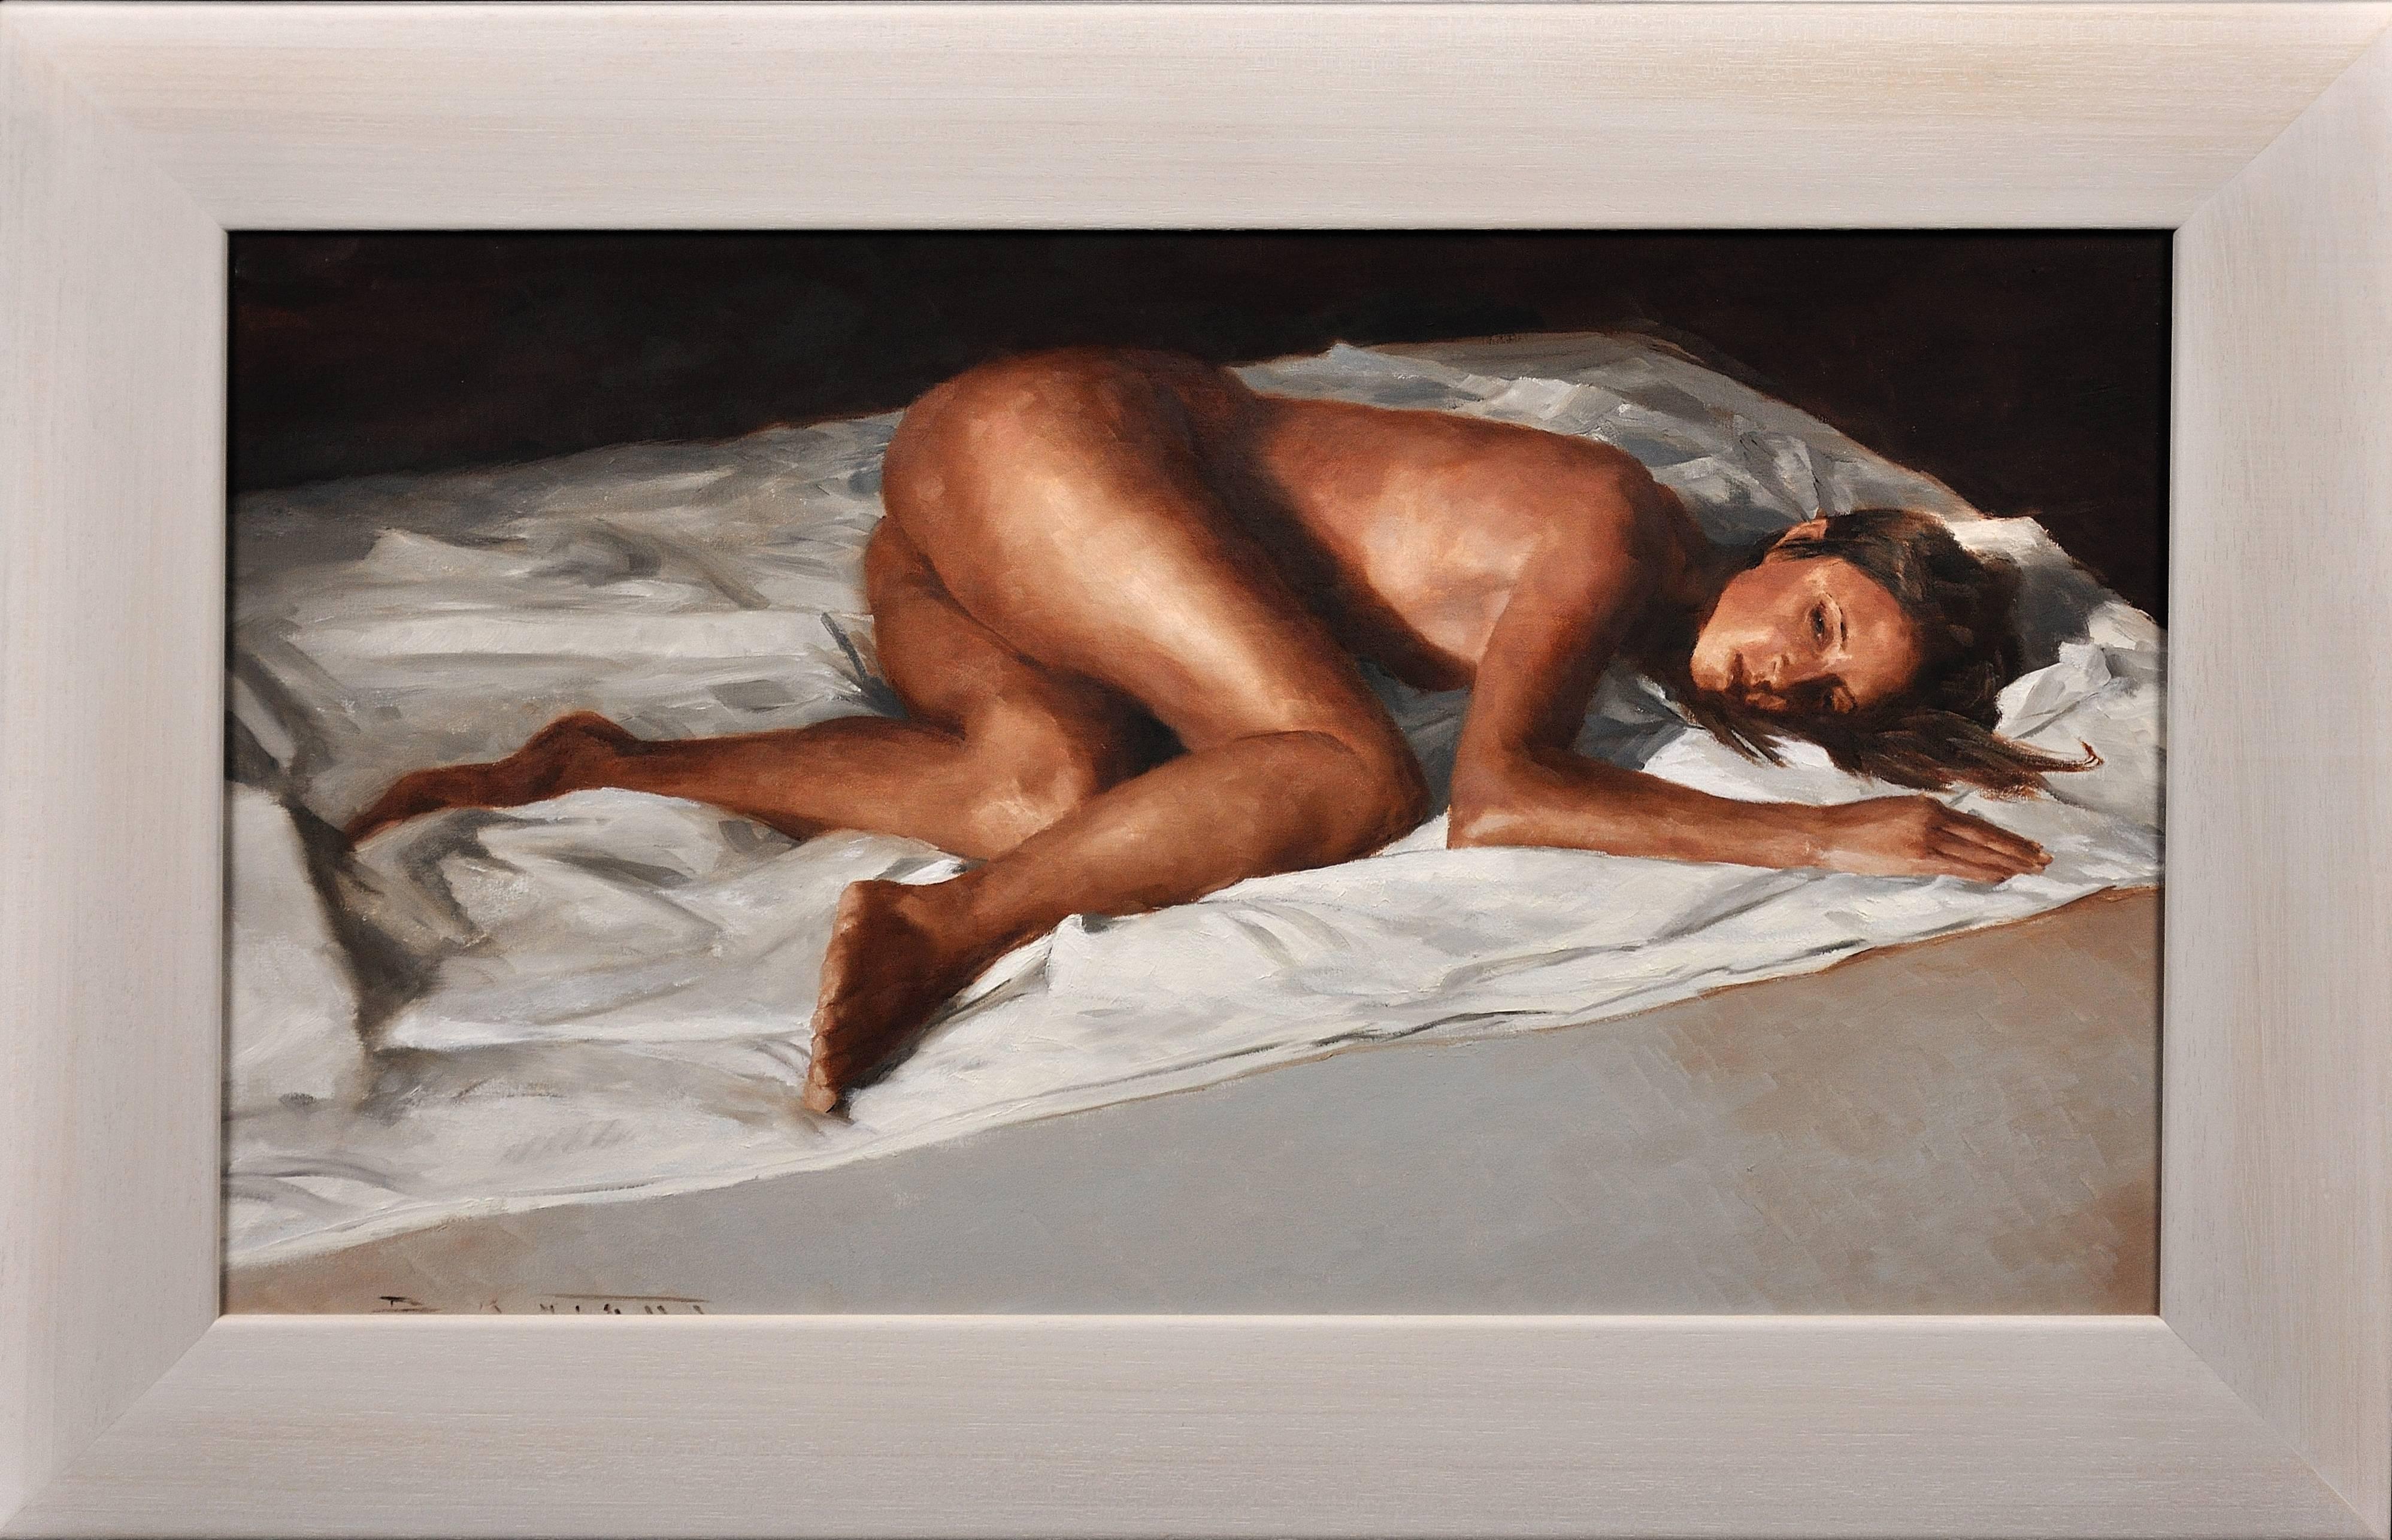 David Knight Nude Painting - White Linen. Female Nude Reclined On Bed. Original Painting. Welsh Artist.